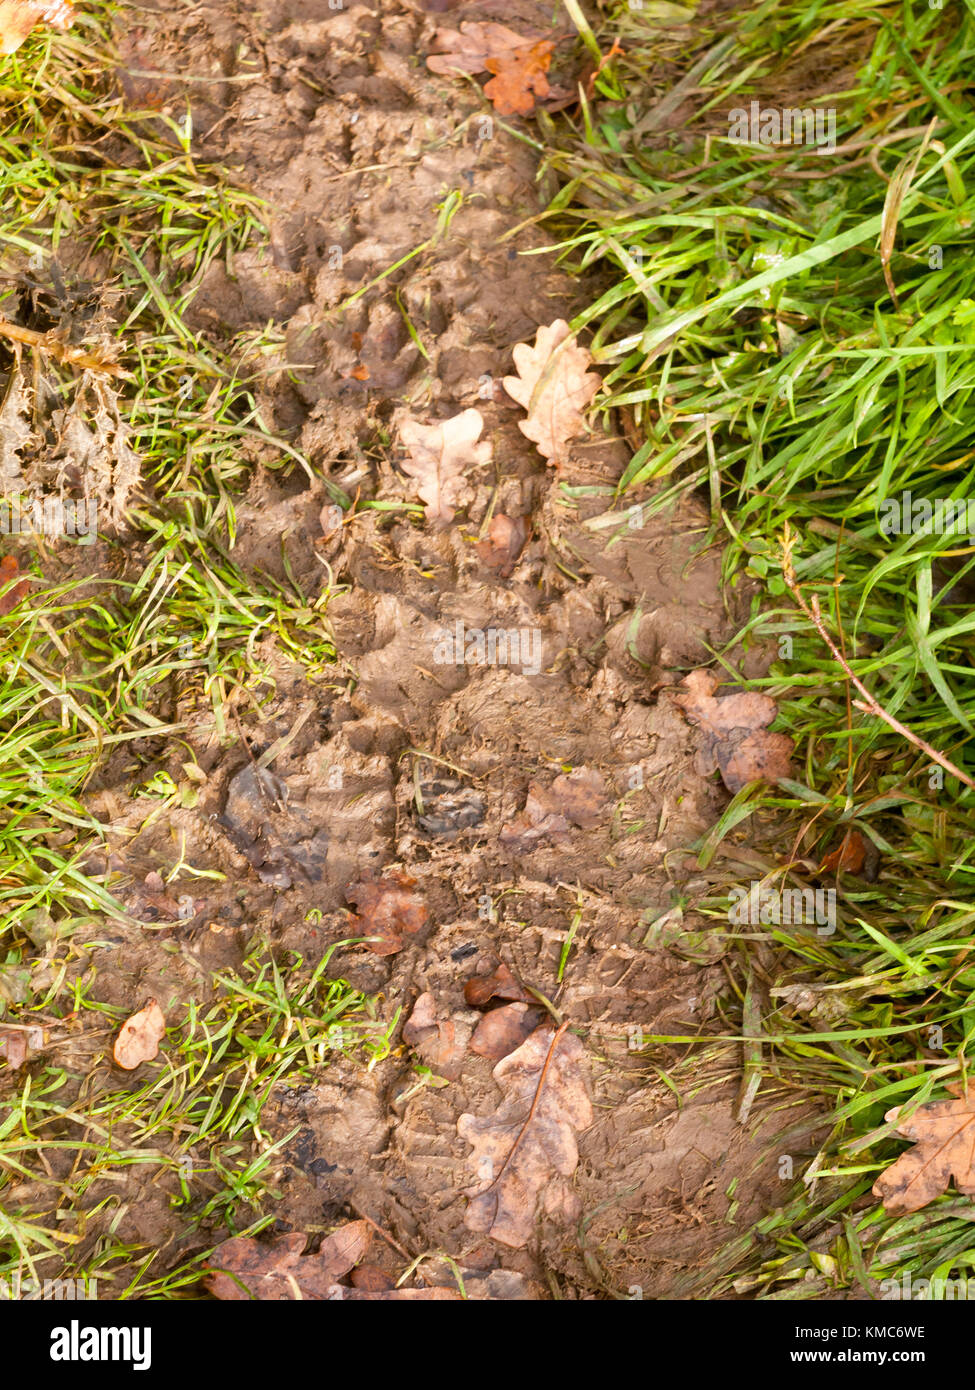 Hole with Muddy Water and Mud and Grass Stock Image - Image of grass,  nature: 175841205